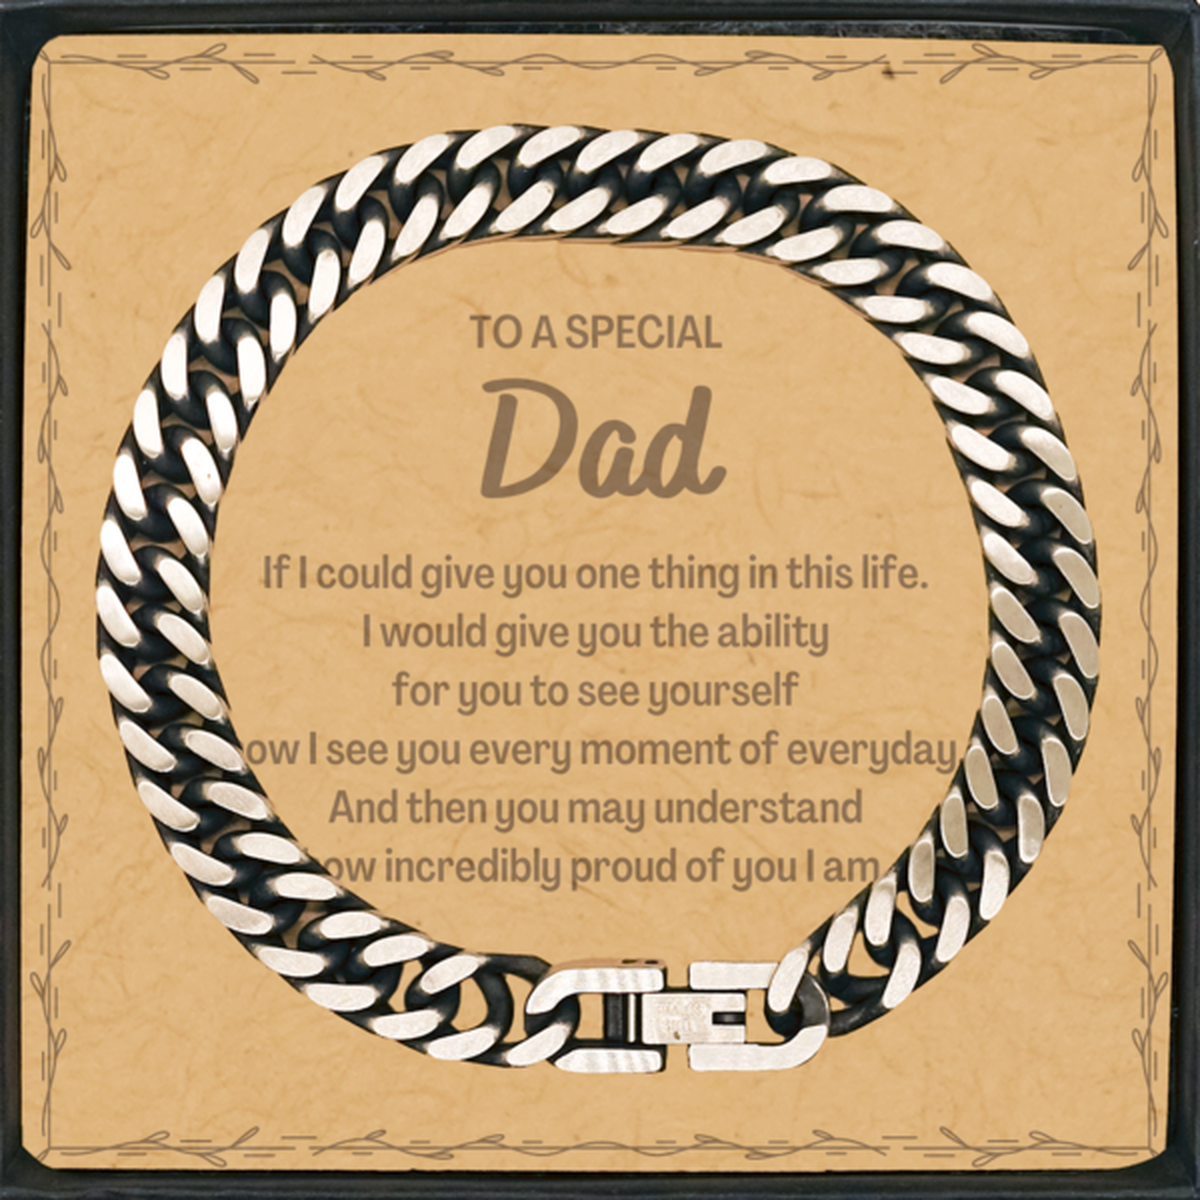 To My Dad Cuban Link Chain Bracelet, Gifts For Dad Message Card, Inspirational Gifts for Christmas Birthday, Epic Gifts for Dad To A Special Dad how incredibly proud of you I am